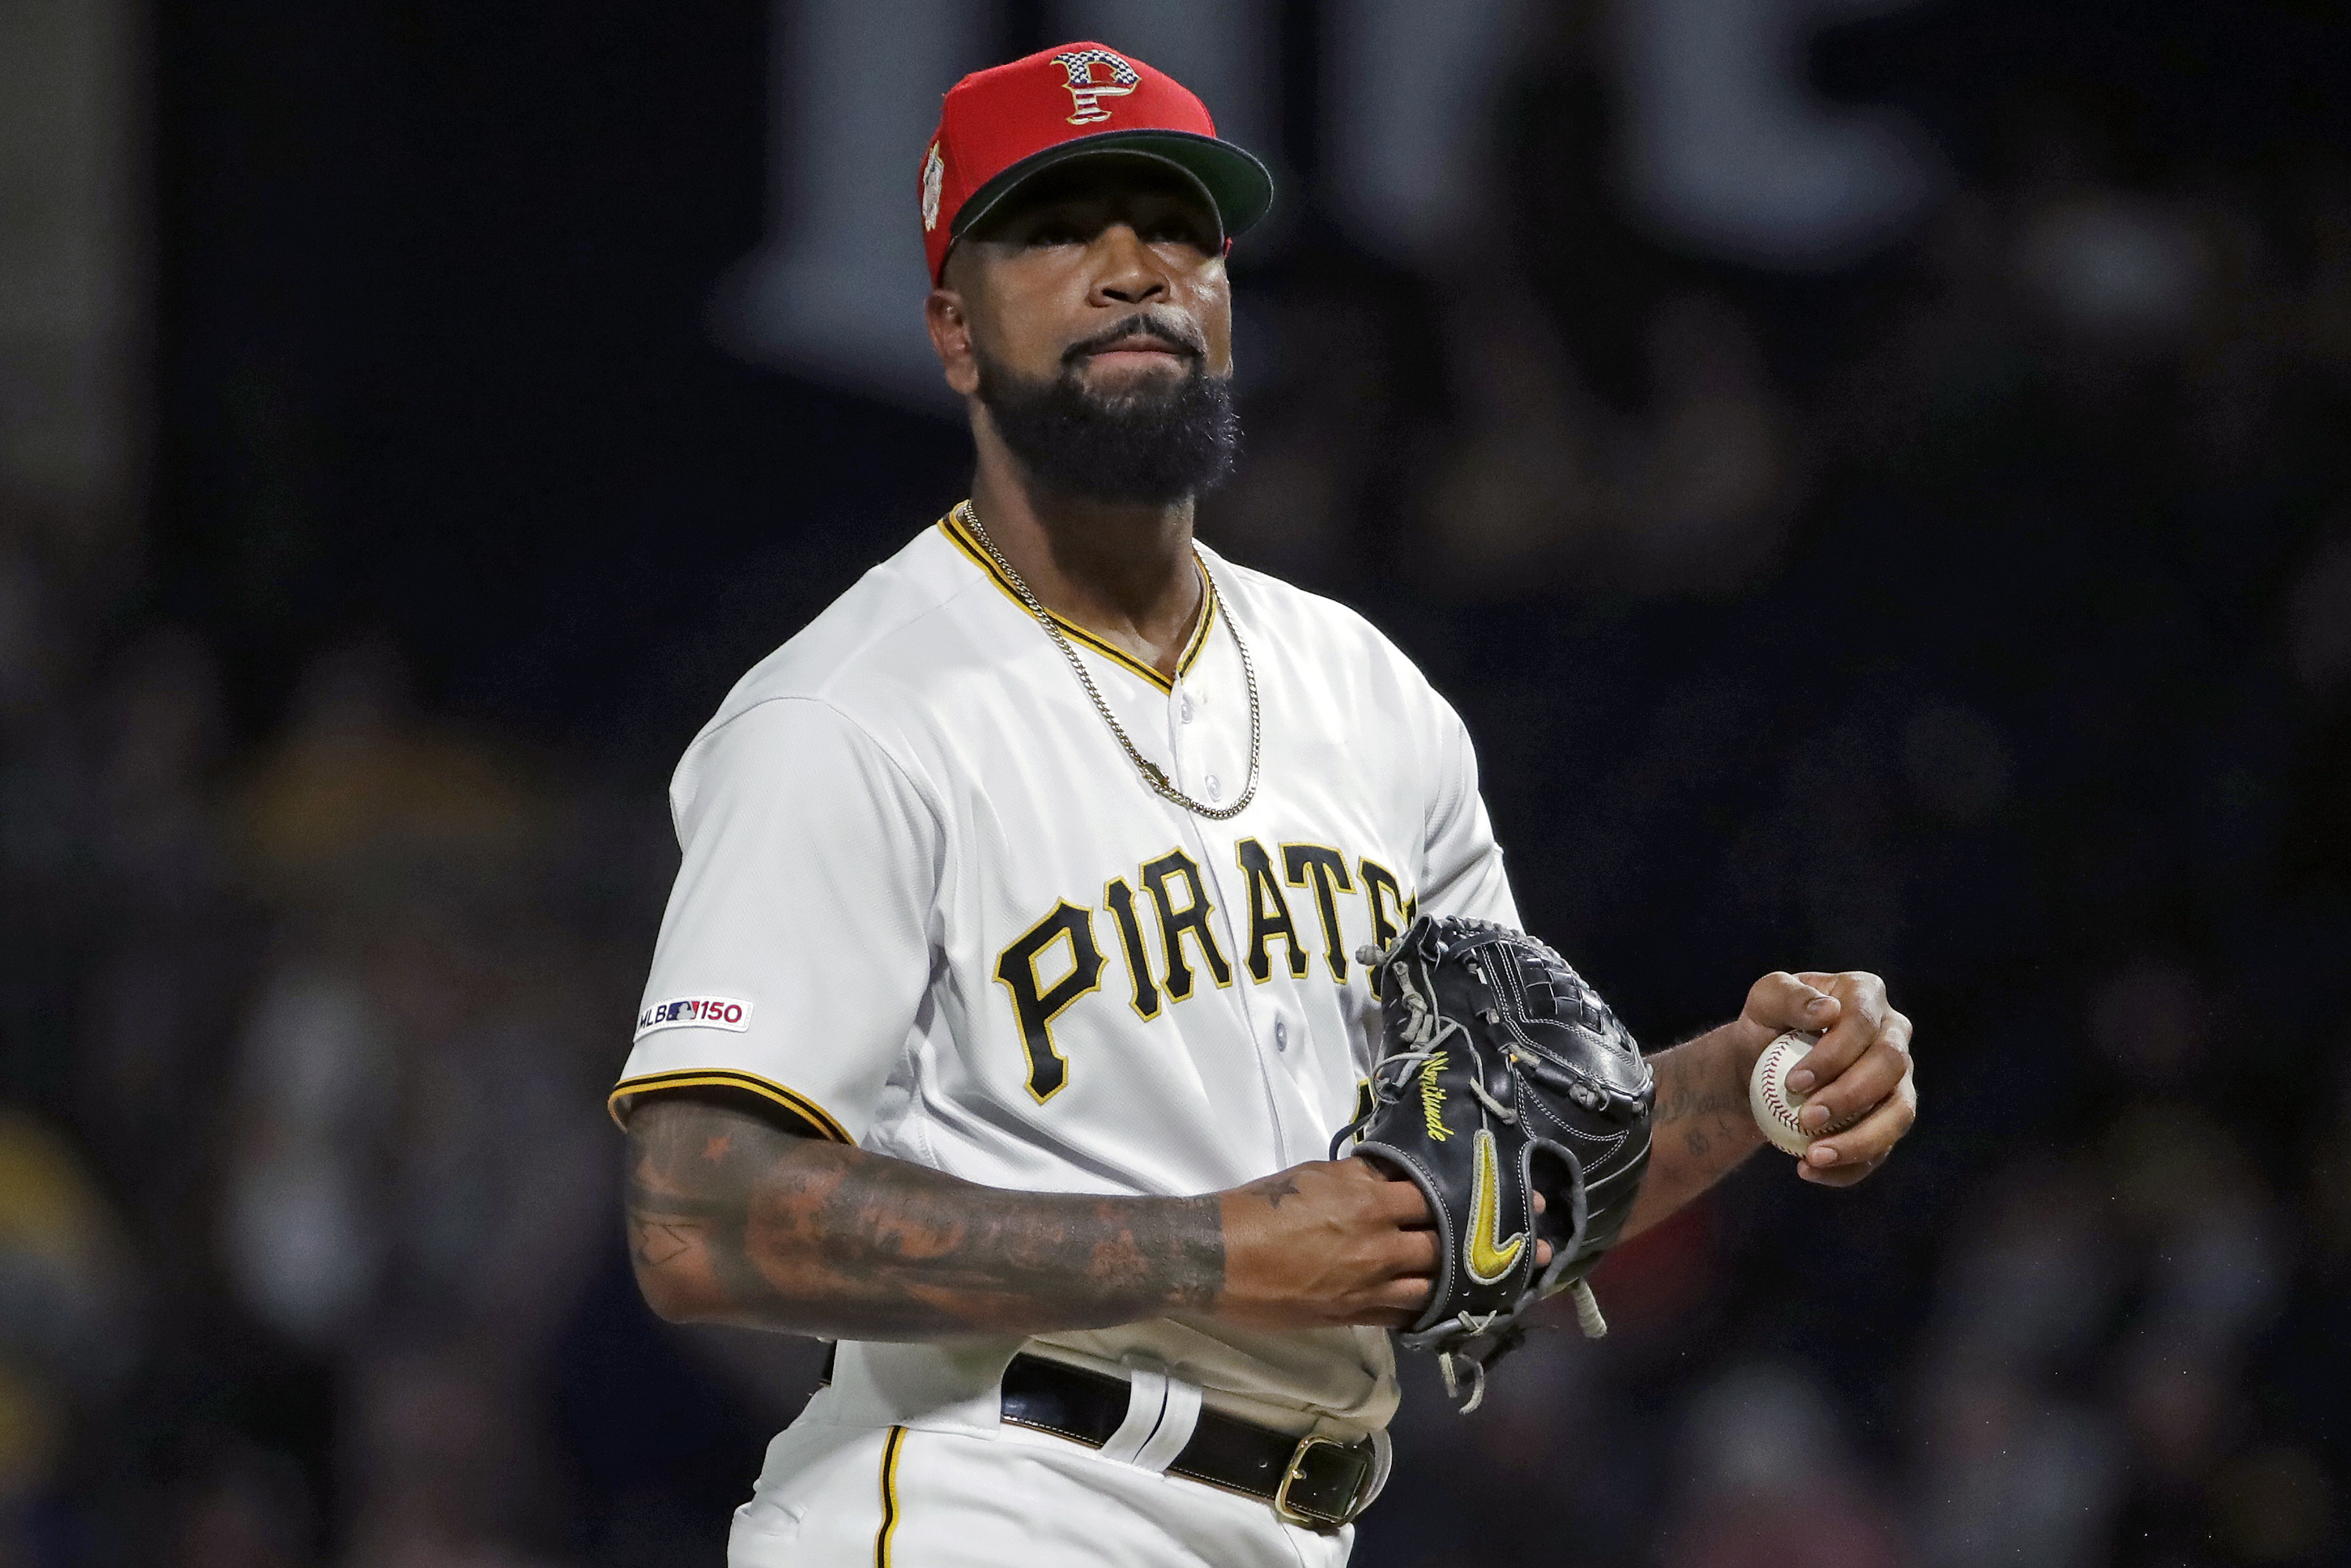 Pirates pitcher Vazquez faces more child sex-related charges